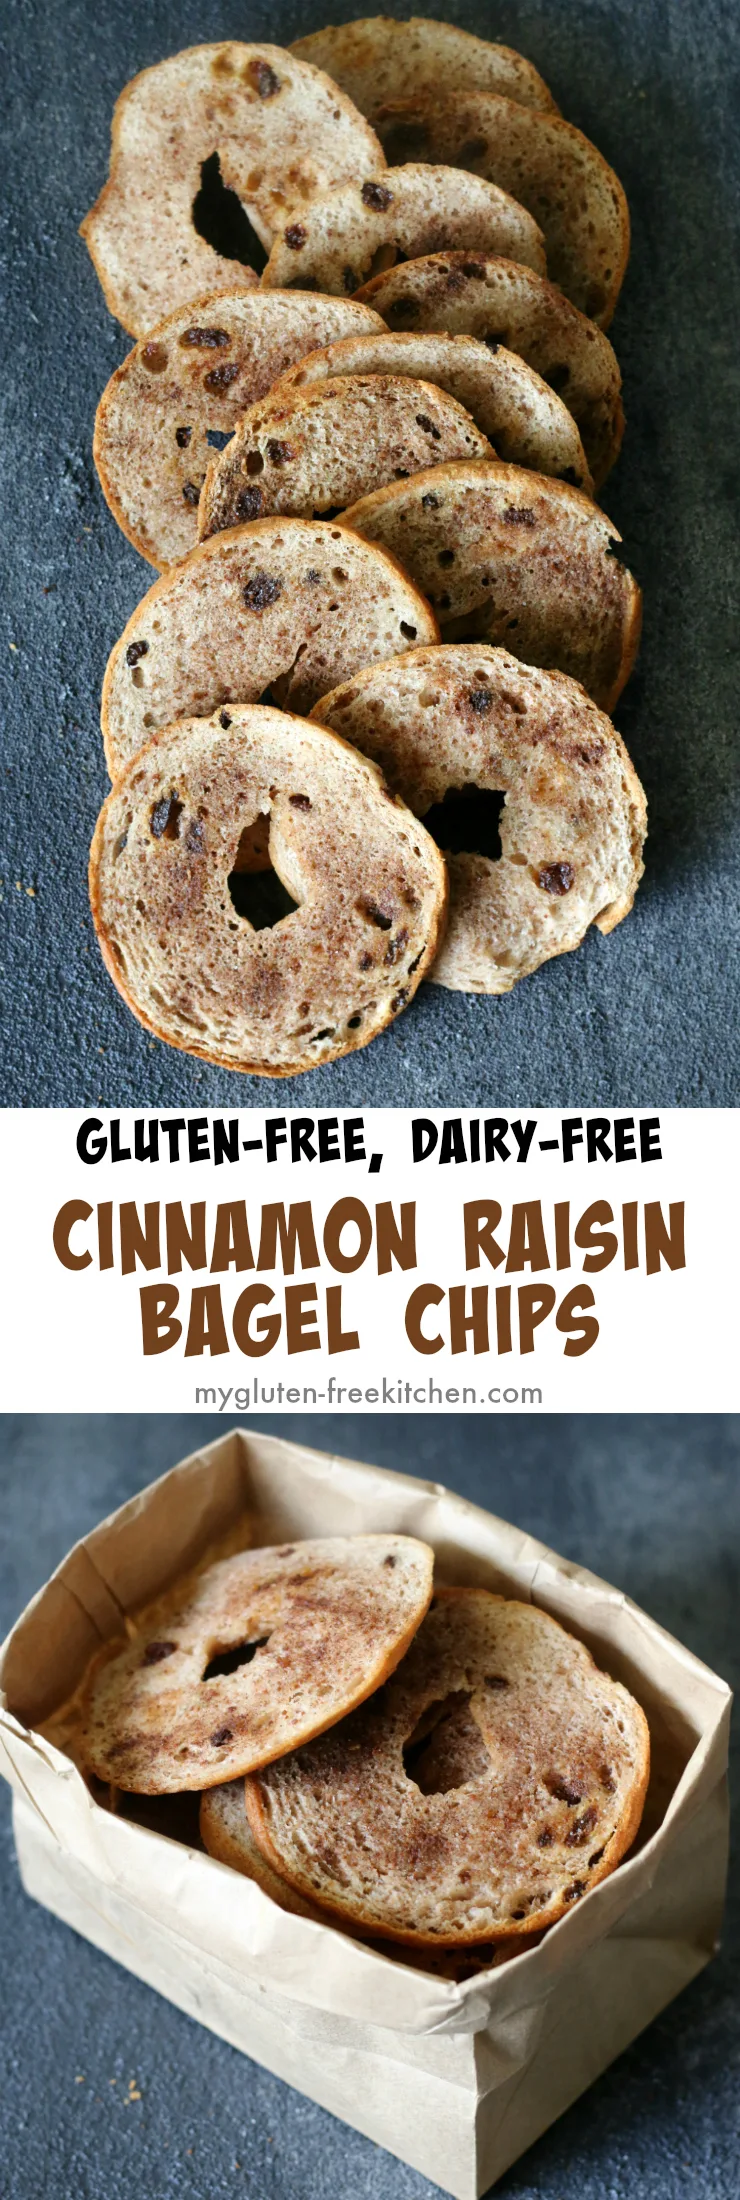 Gluten-free Dairy-free Cinnamon Raisin Bagel Chips - Crunchy snack that's allergy friendly. Great for school lunches or backpack snacks!